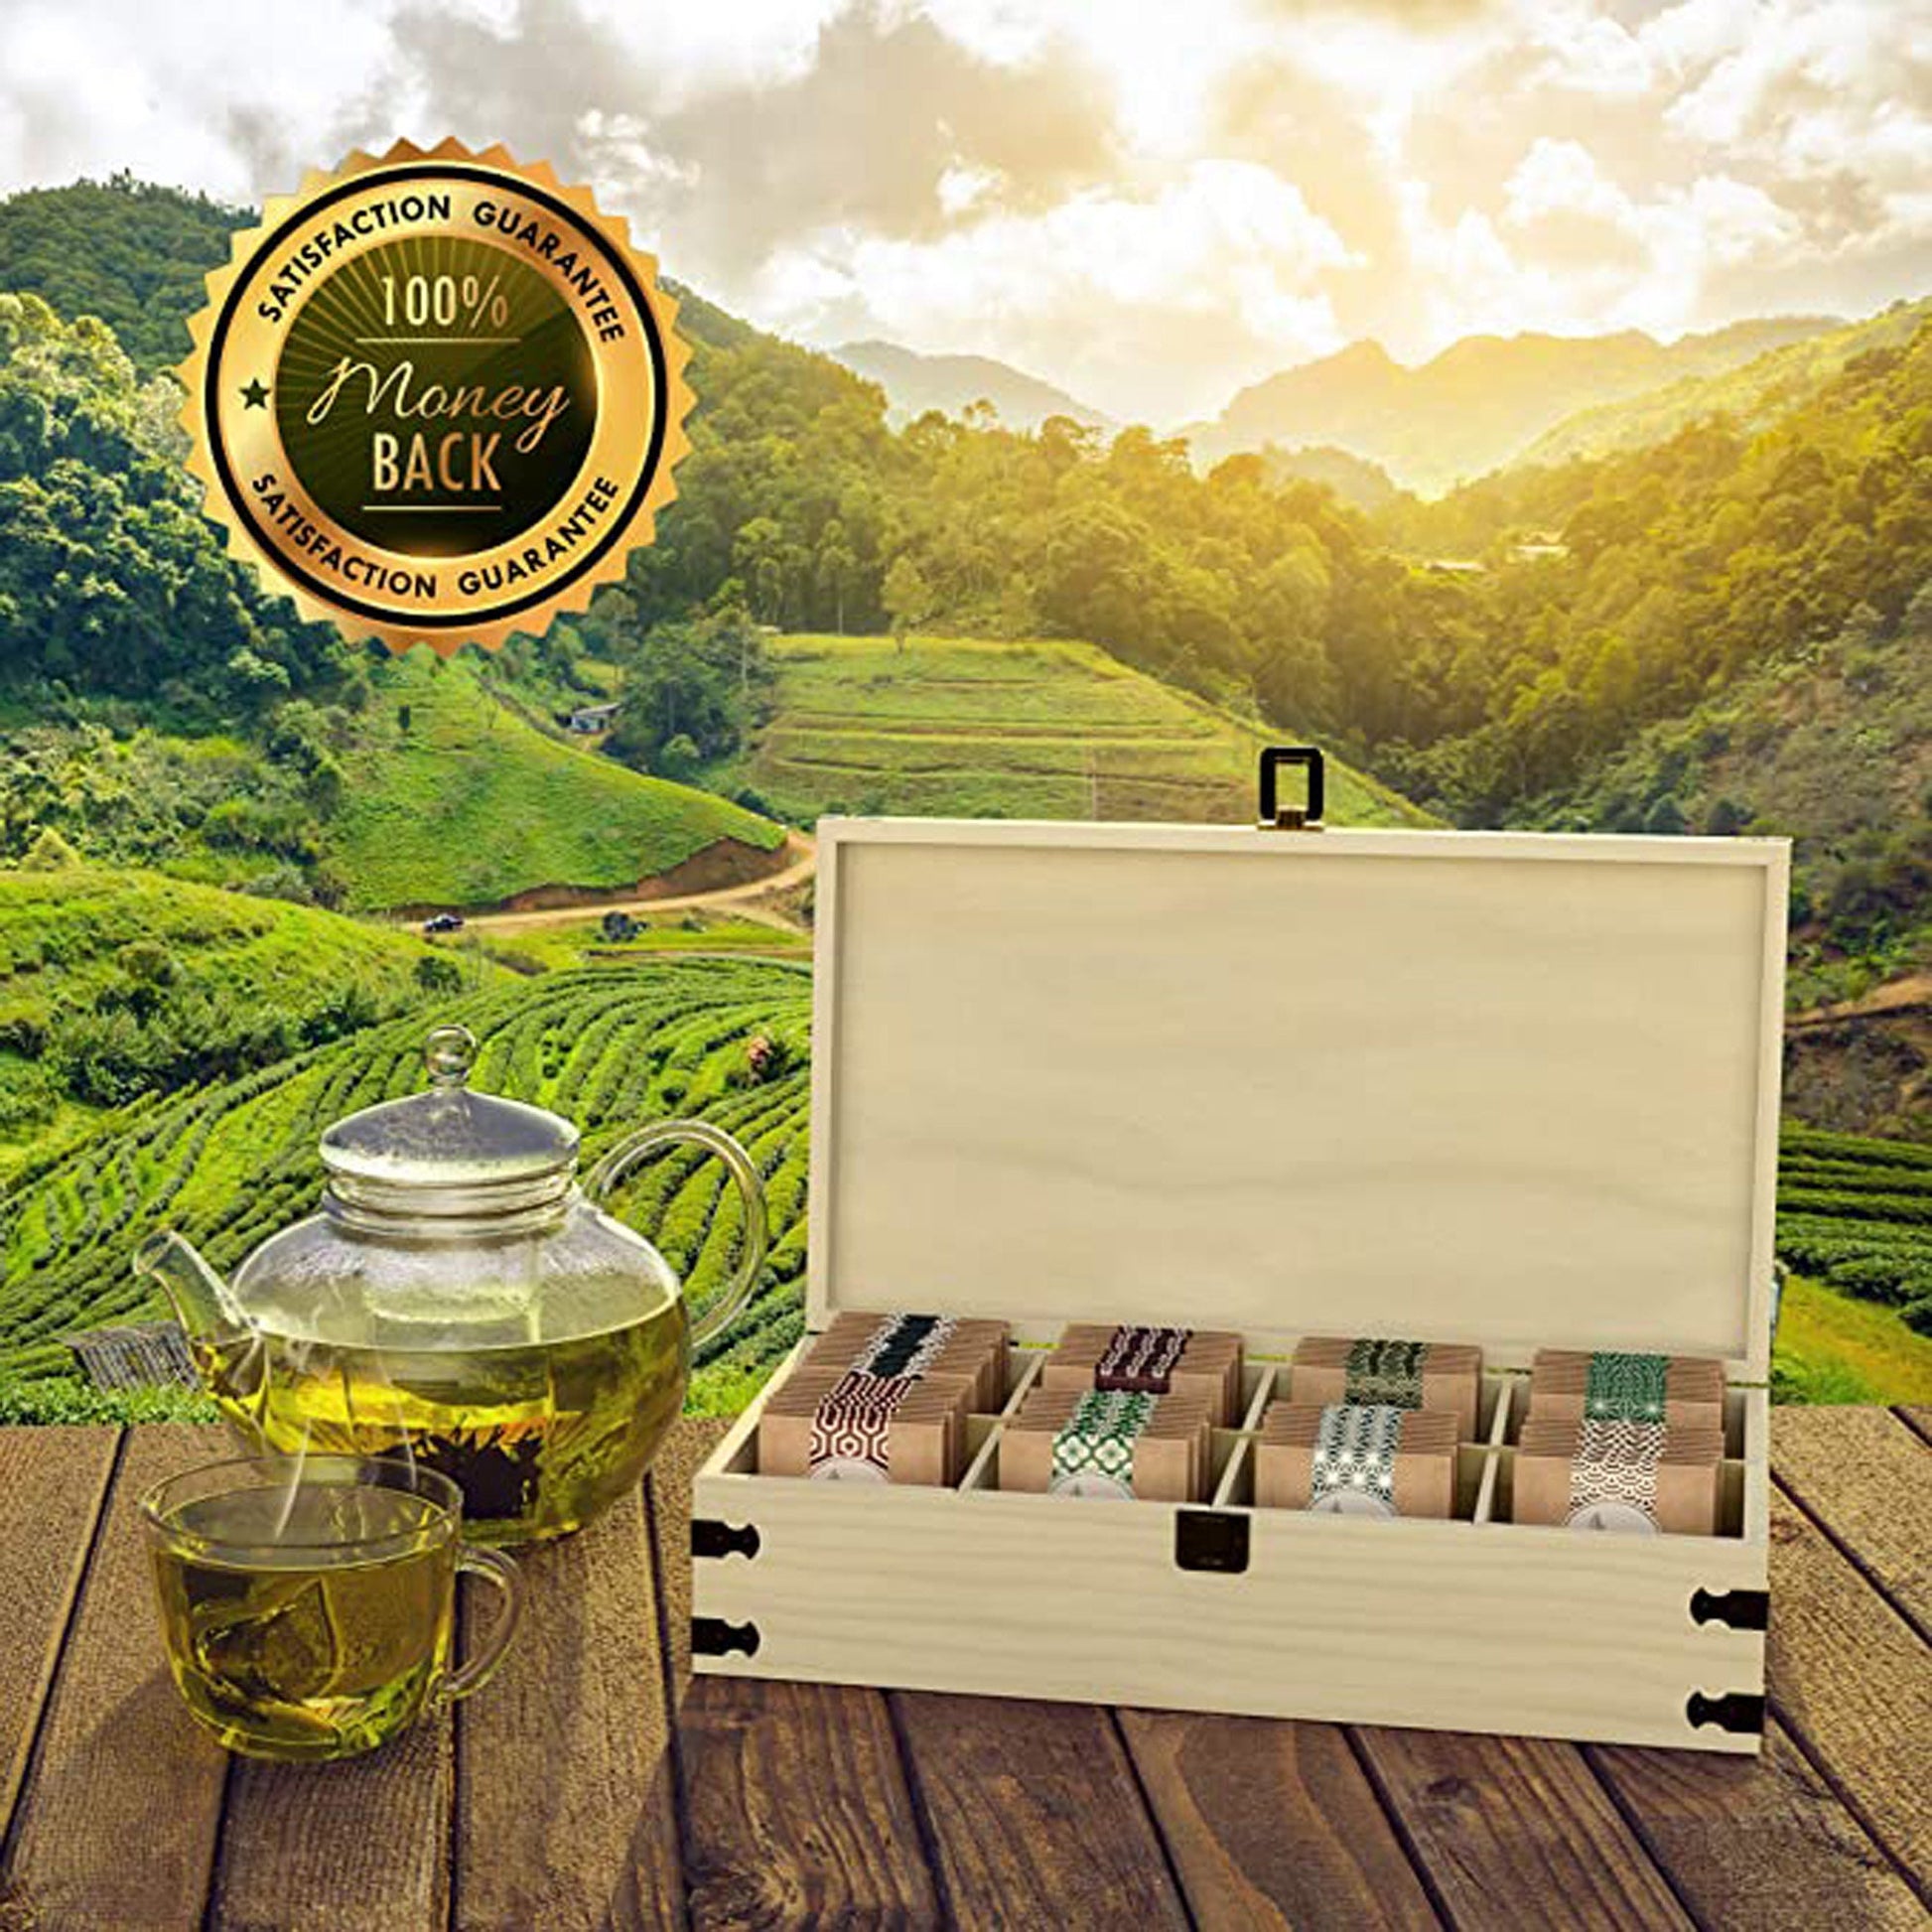 Zen Earth Inspired Pine Wood Tea Storage Chest | Handmade Wooden Kitchen Organizer Box - Adjustable Dividers and Eco Friendly Stain